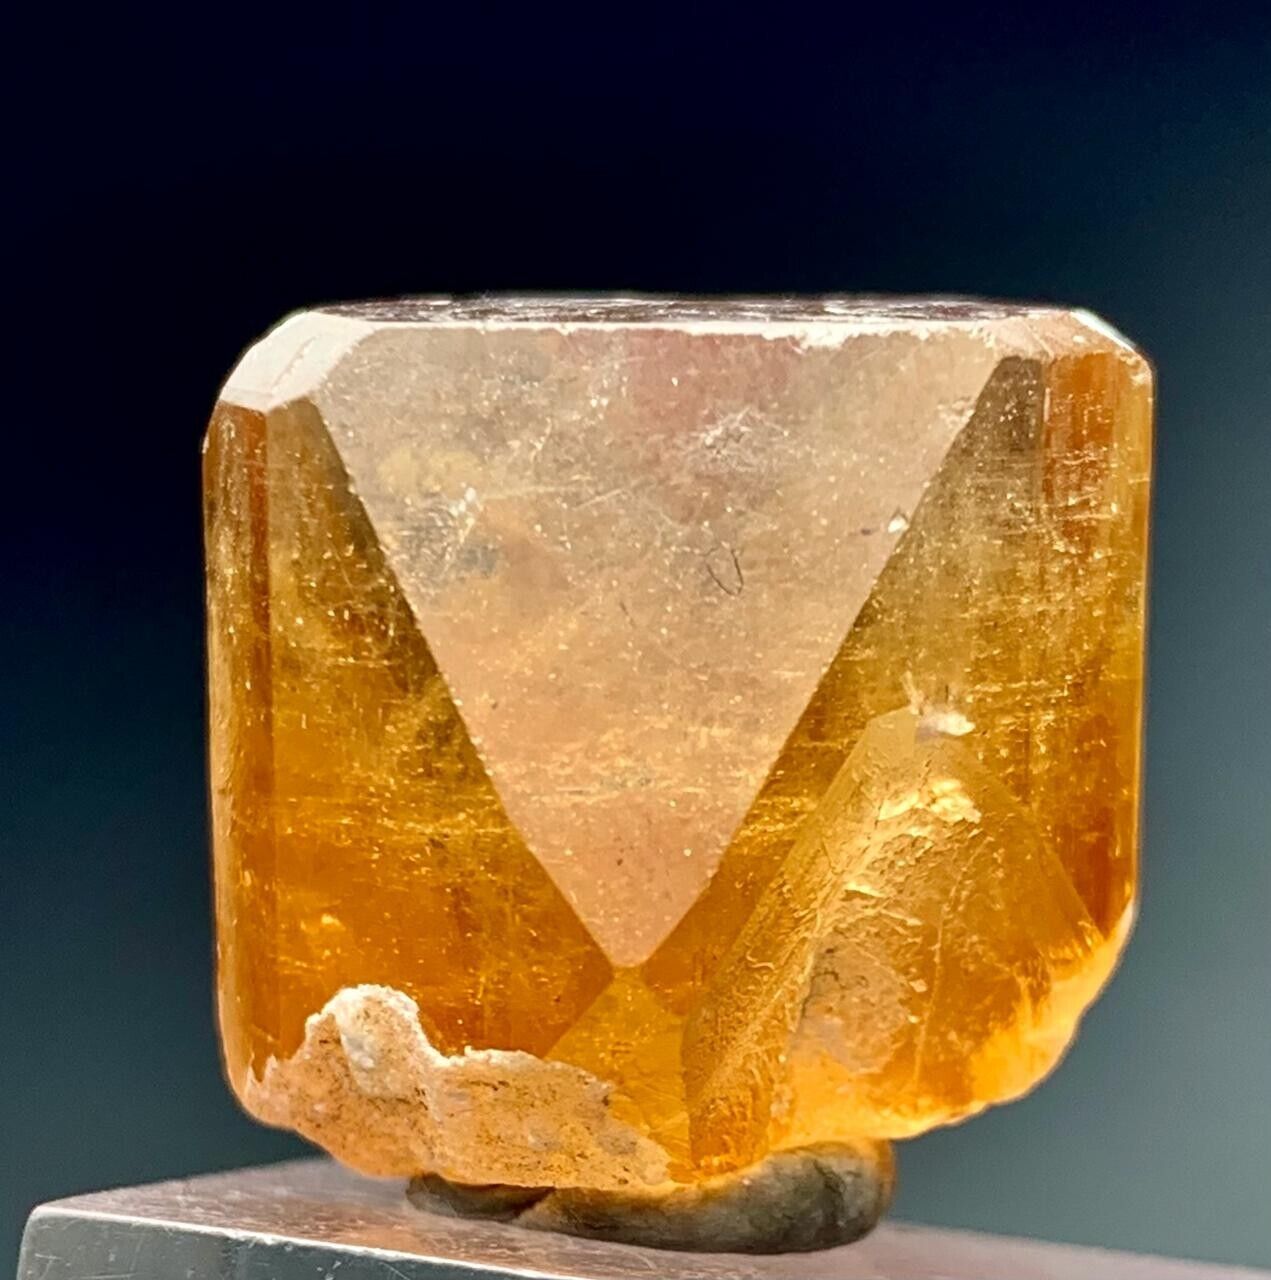 75 Cts Topaz Terminated Crystal From Skardu Pakistan